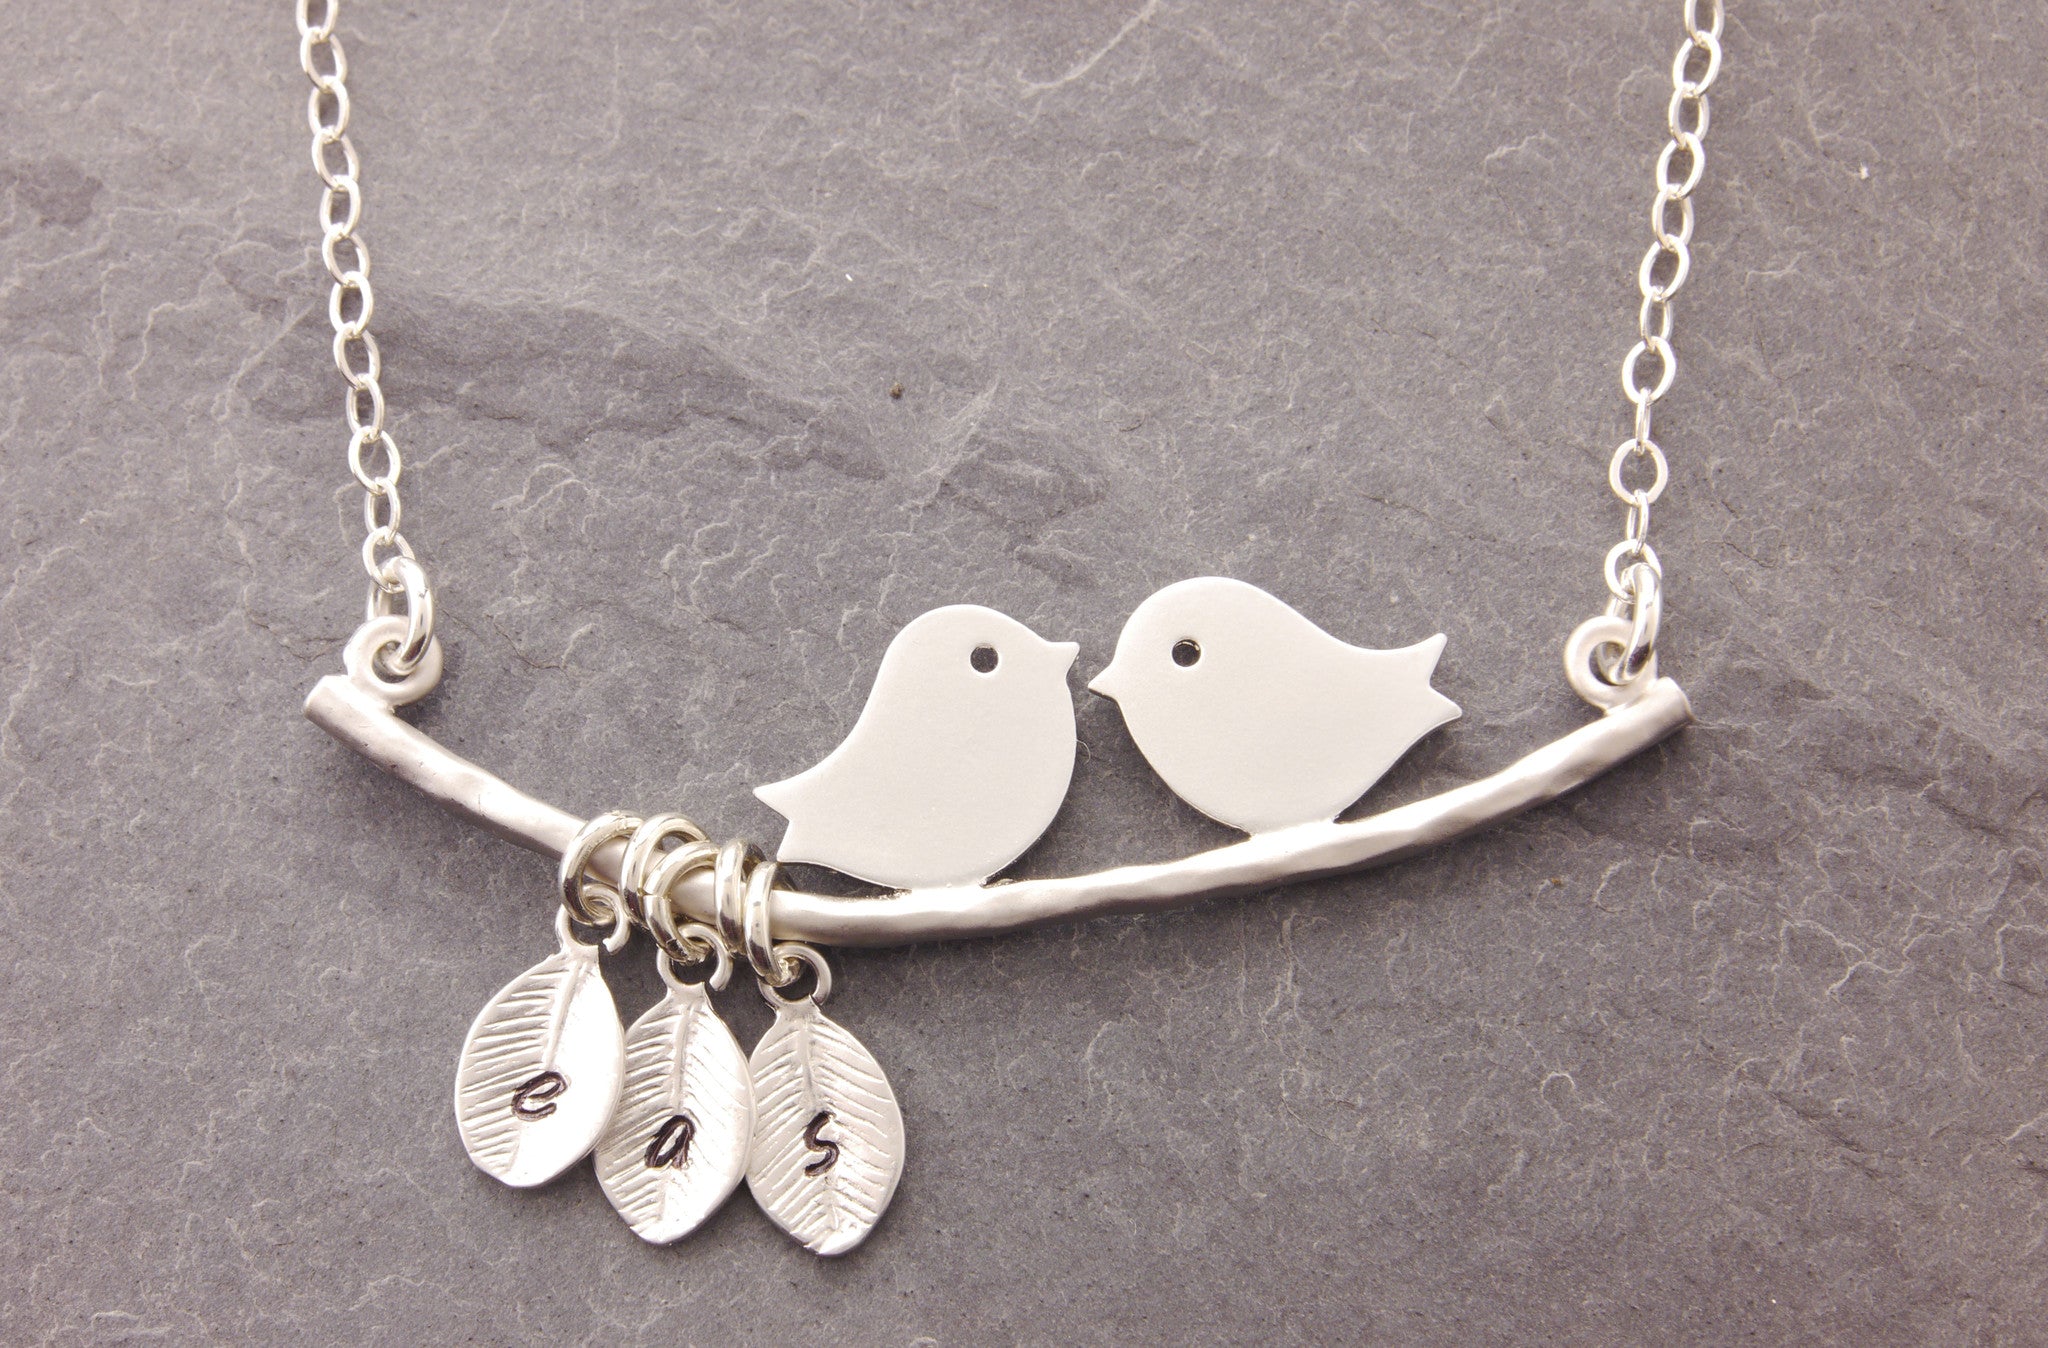 Birds on branch necklace with initialized leaves